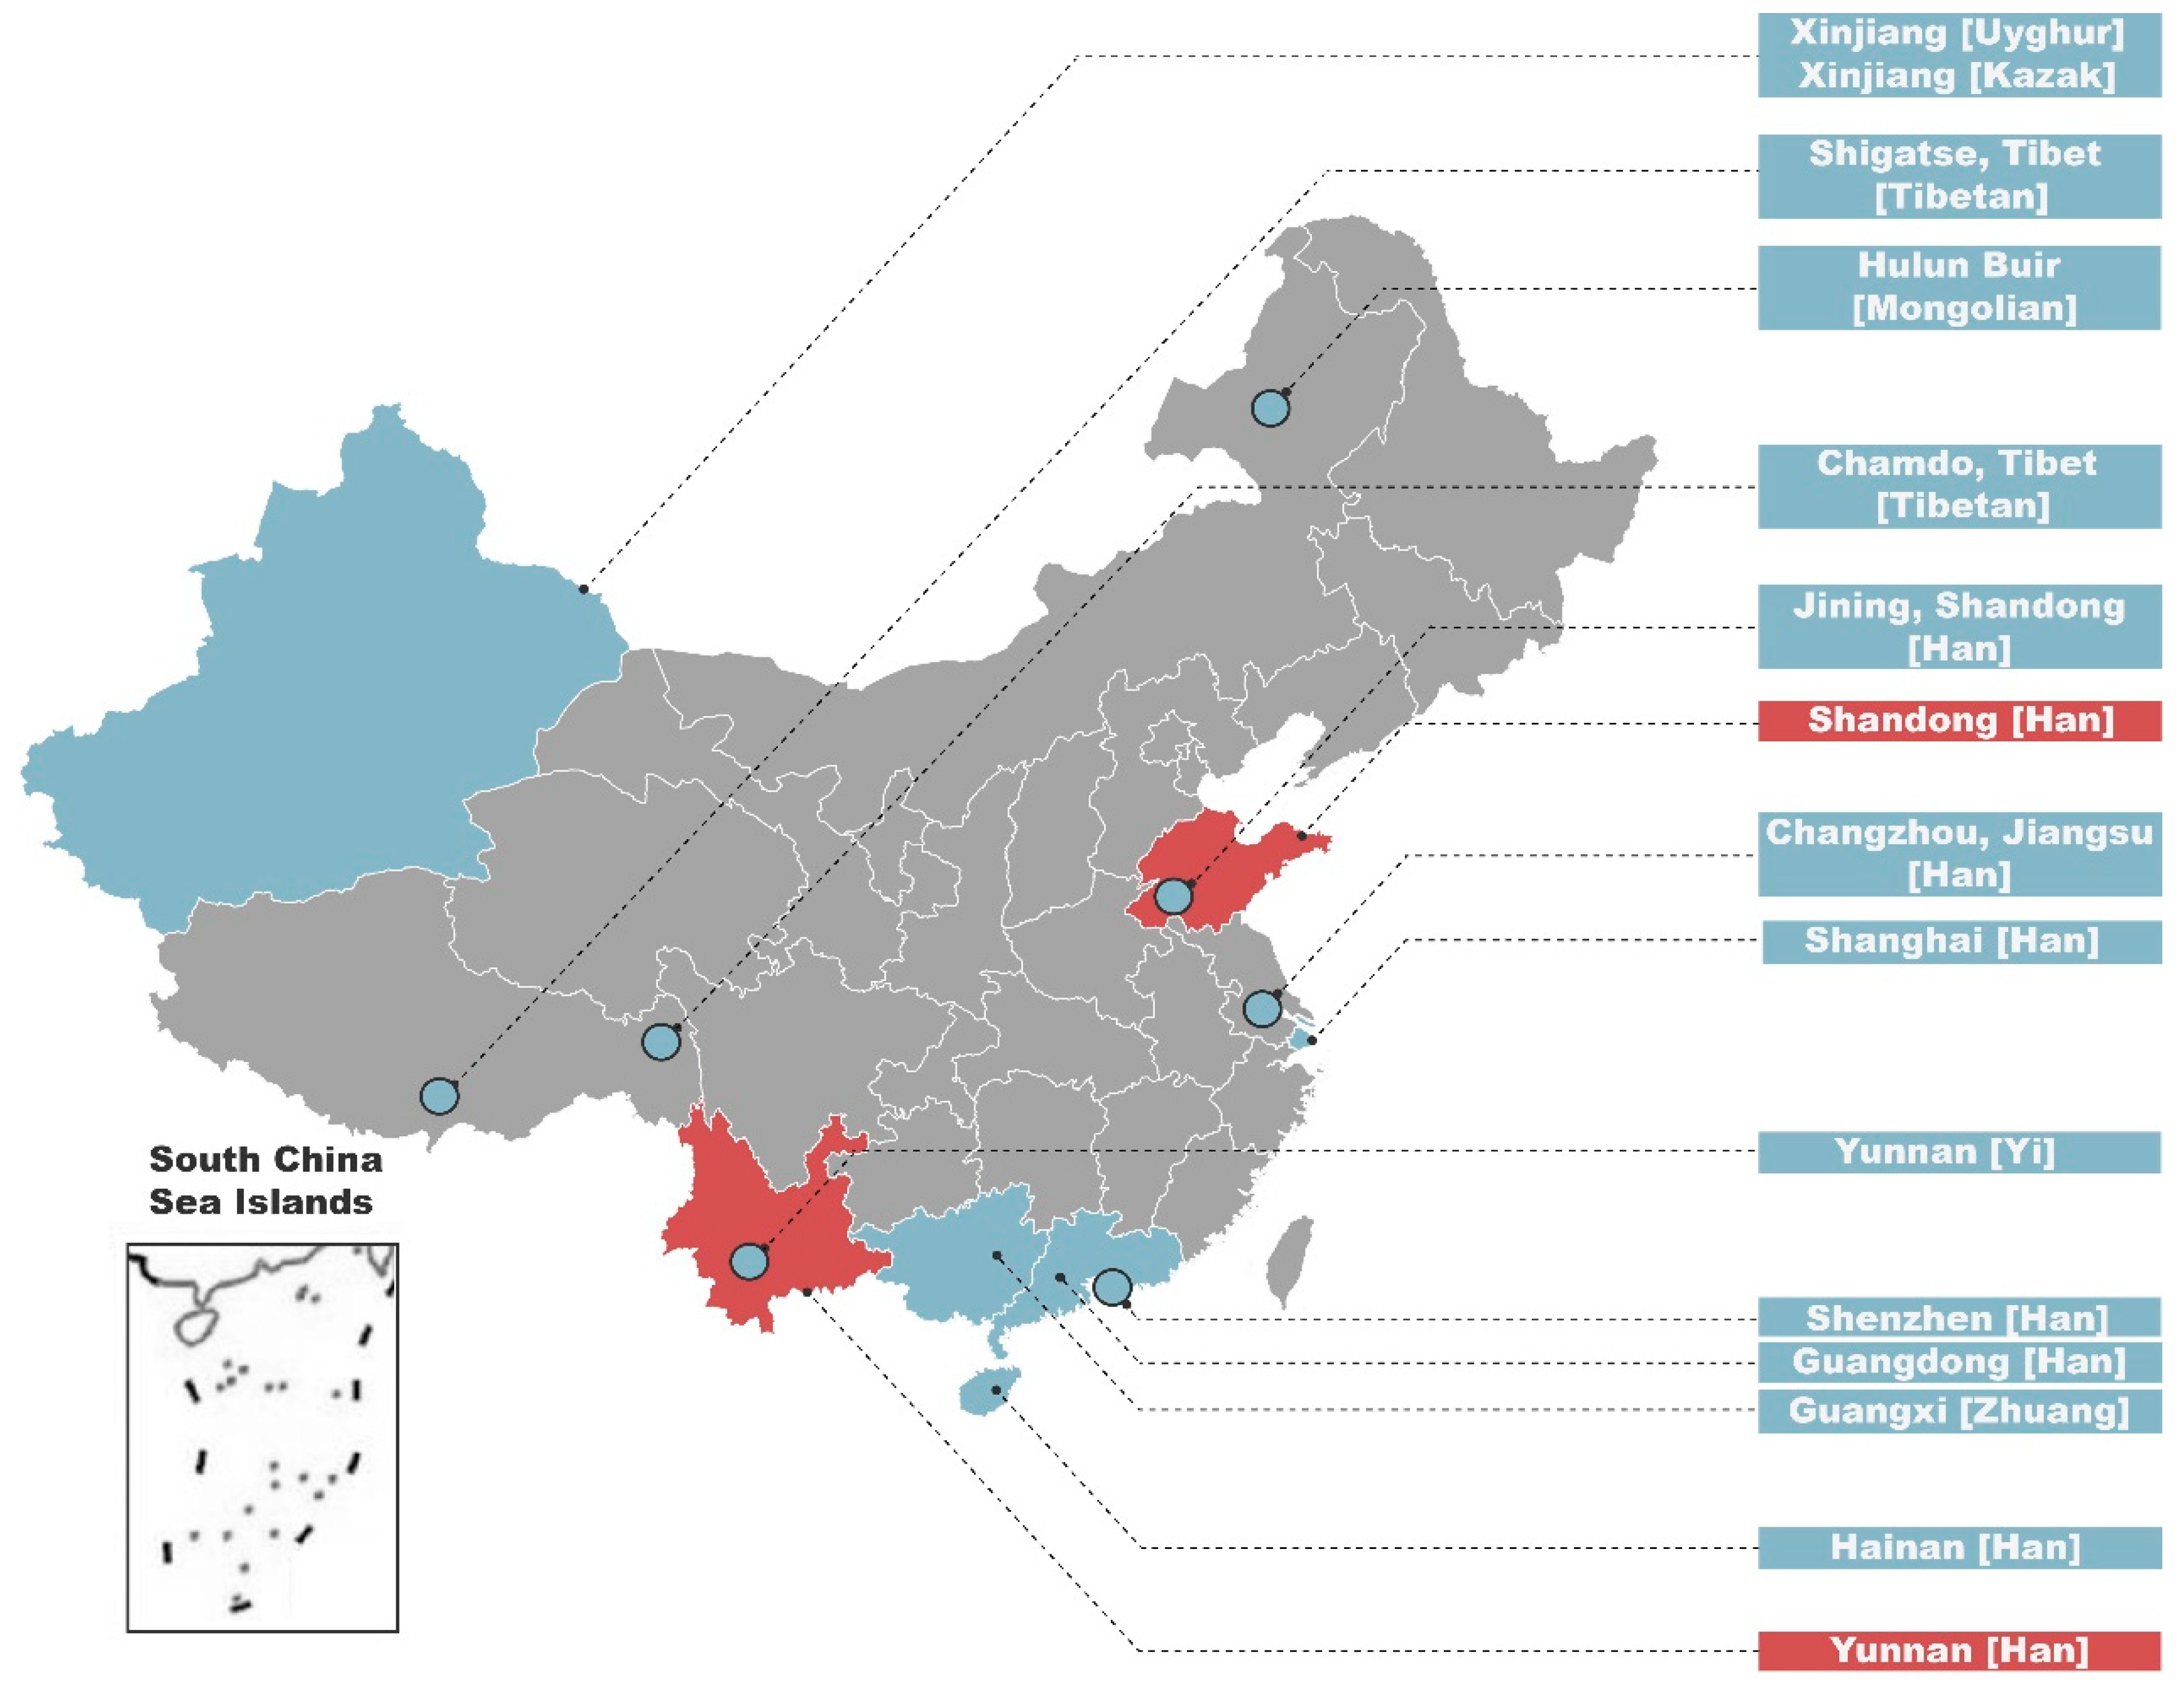 Genes | Free Full-Text | Genetic Reconstruction and Forensic Analysis of  Chinese Shandong and Yunnan Han Populations by Co-Analyzing Y Chromosomal  STRs and SNPs